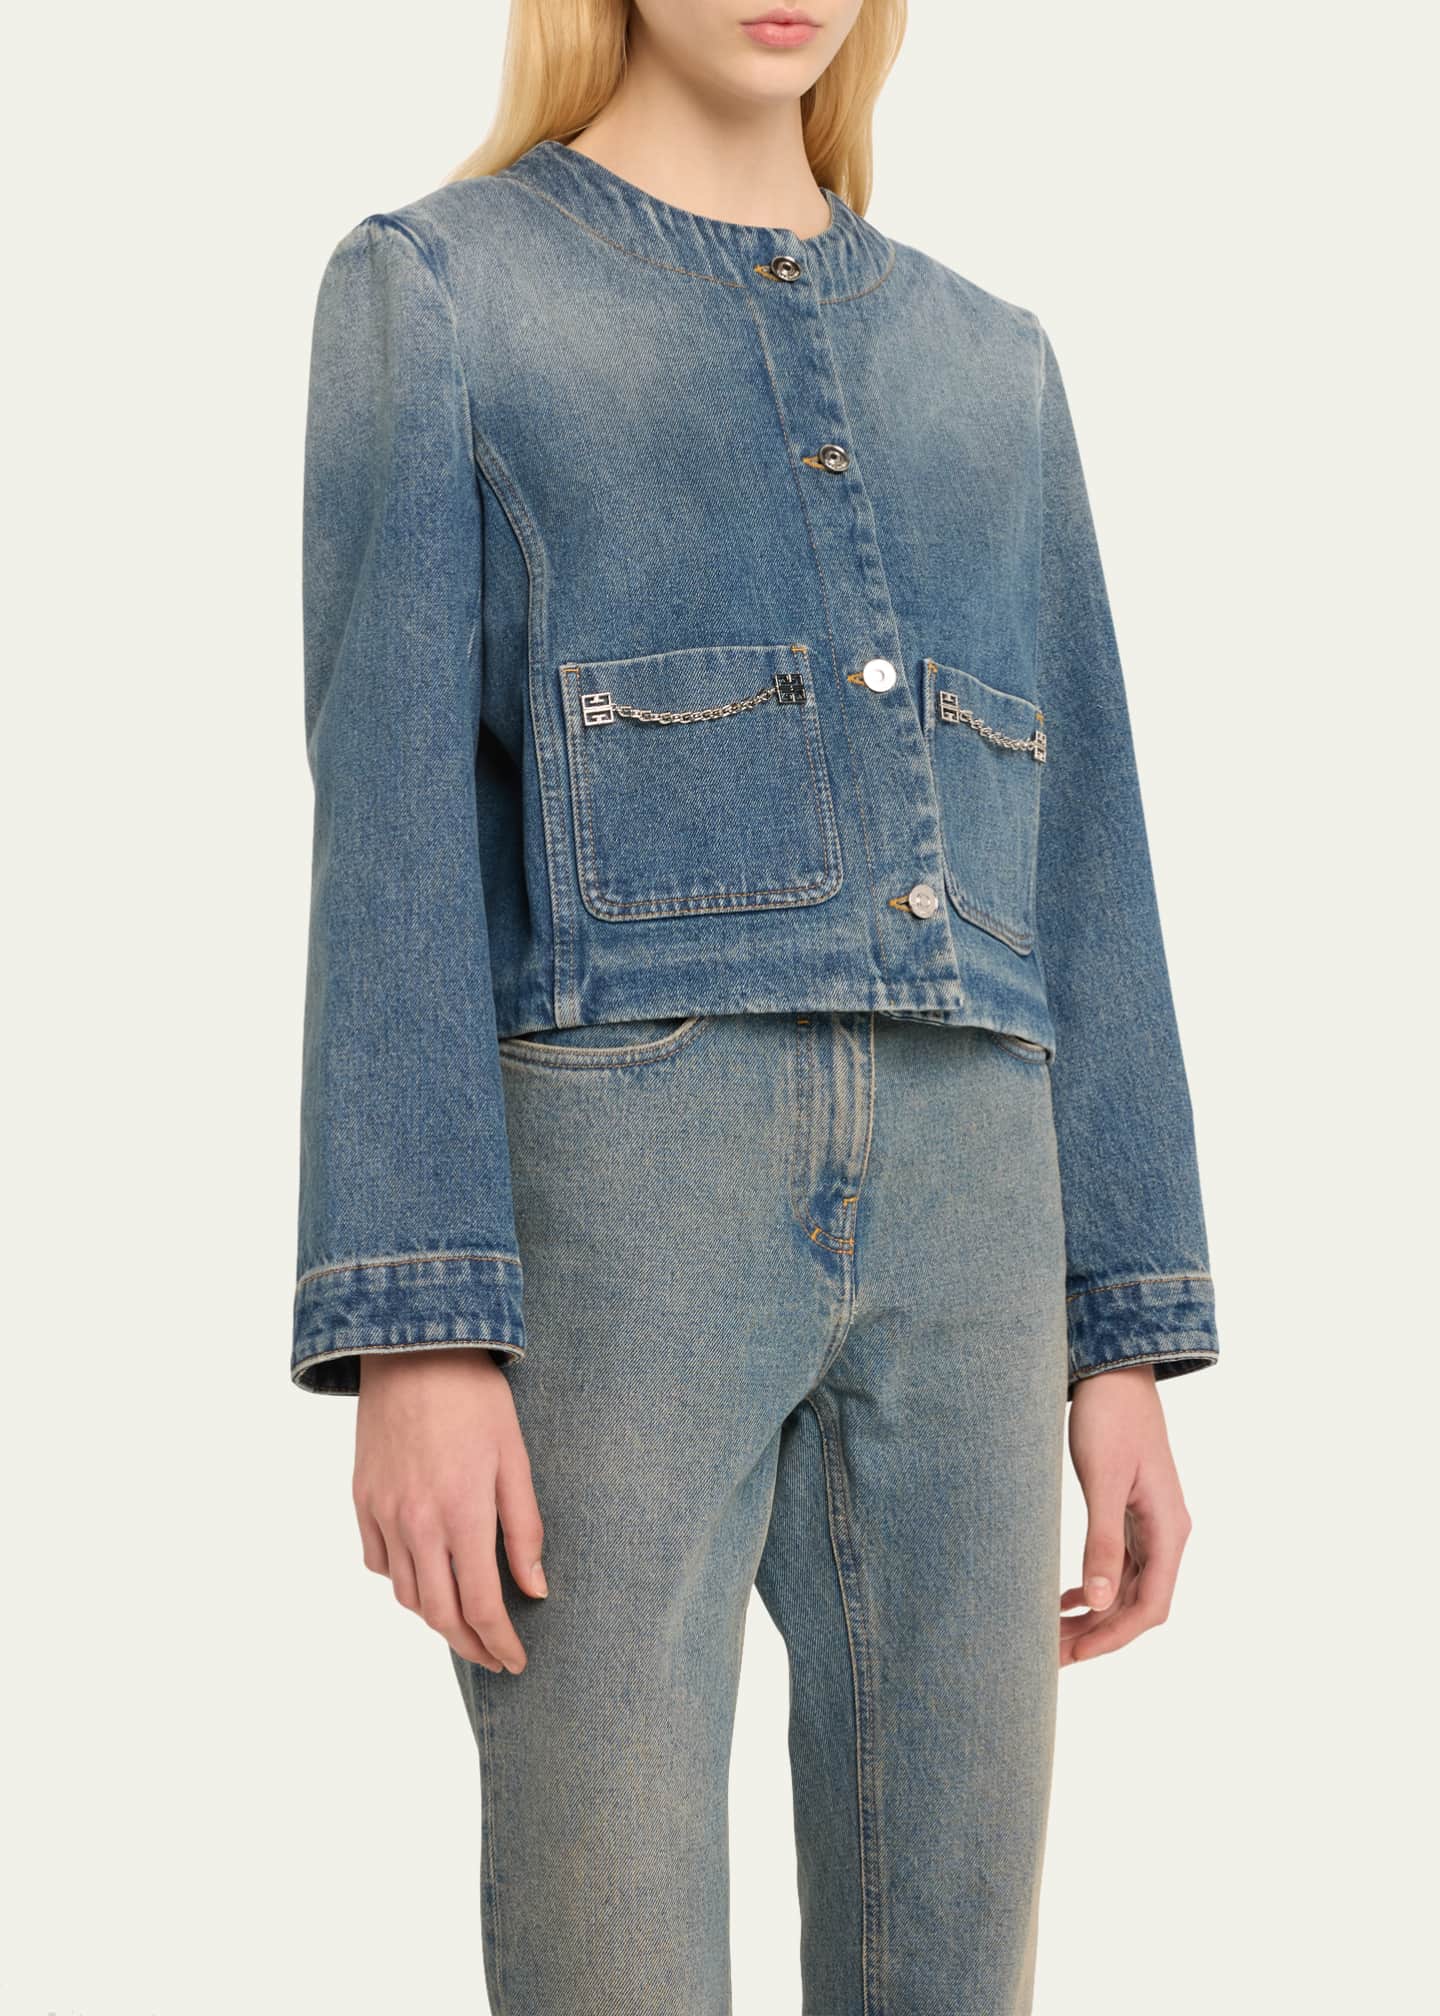 Givenchy Jean Jacket with 4G Chain Detail - Bergdorf Goodman